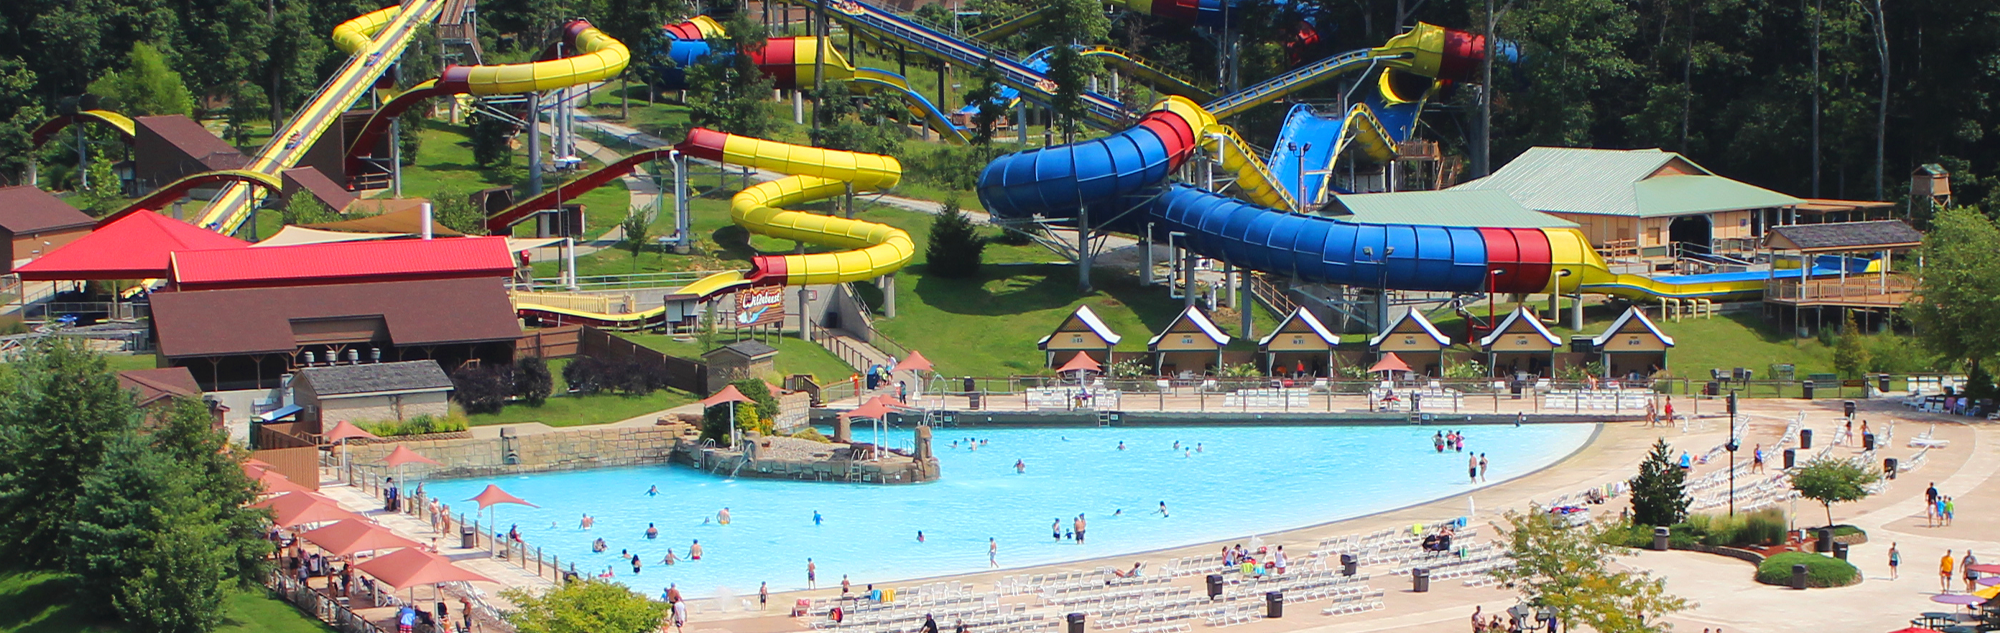 Wildebeest and Mammoth water coasters are visible in this aerial shot of the water park, as a few families enjoy Bahari Wave Pool.